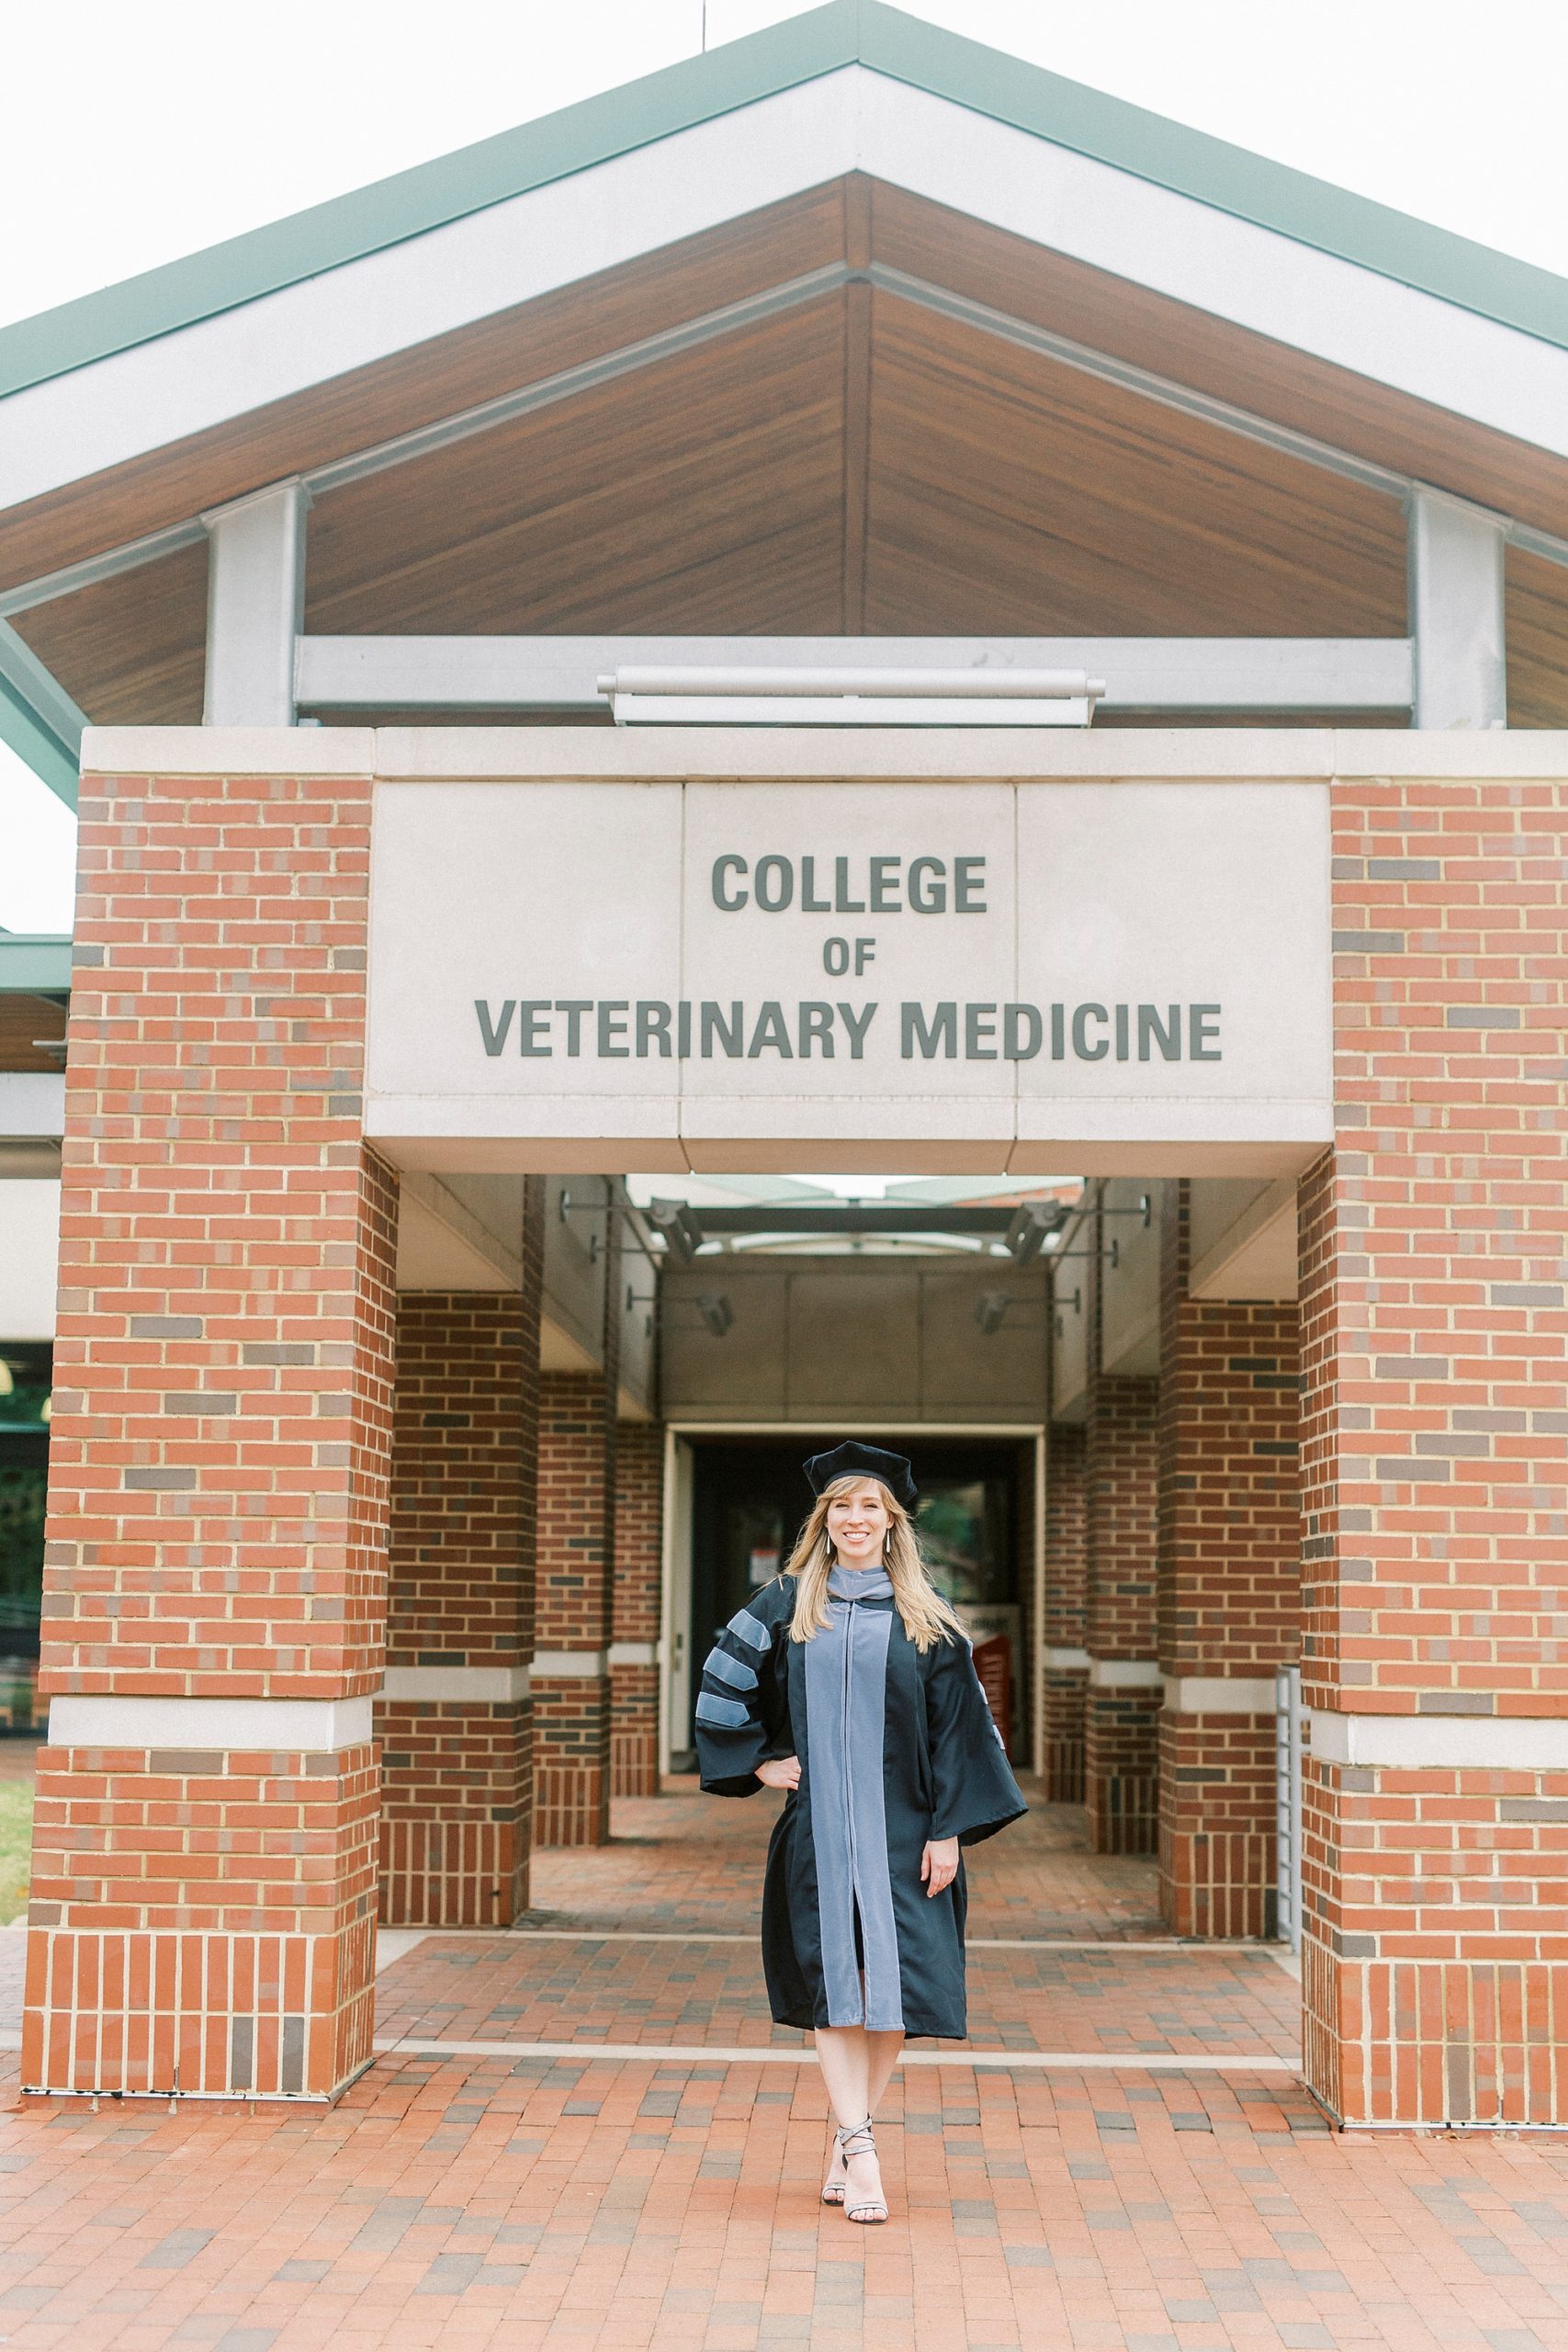 College of Veterinary medicine graduate poses outside sign